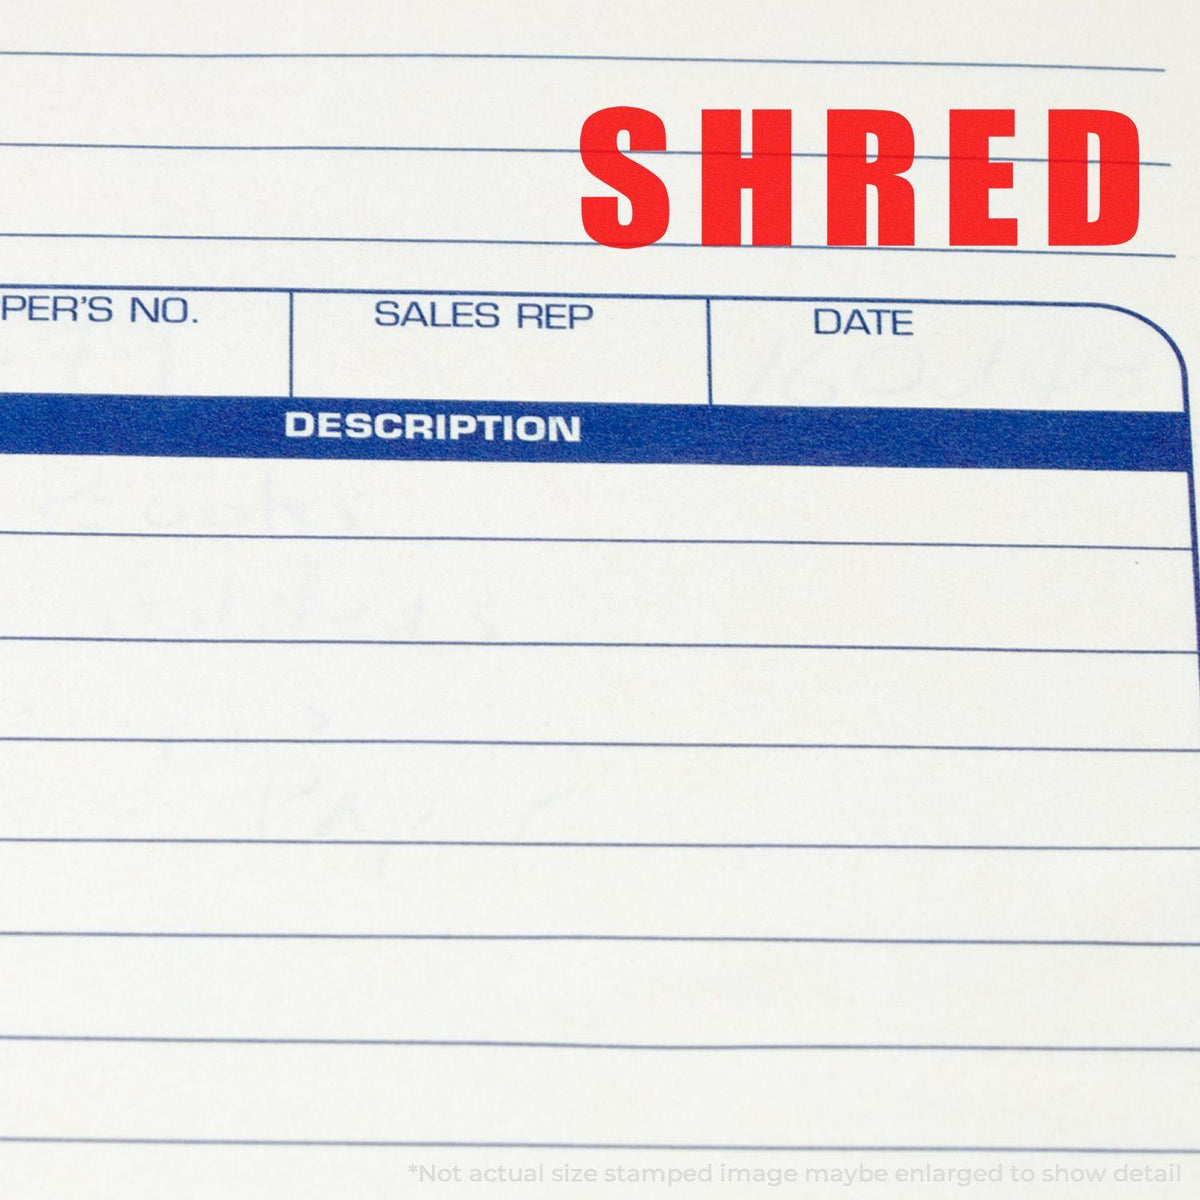 Large Self-Inking Bold Shred Stamp In Use Photo